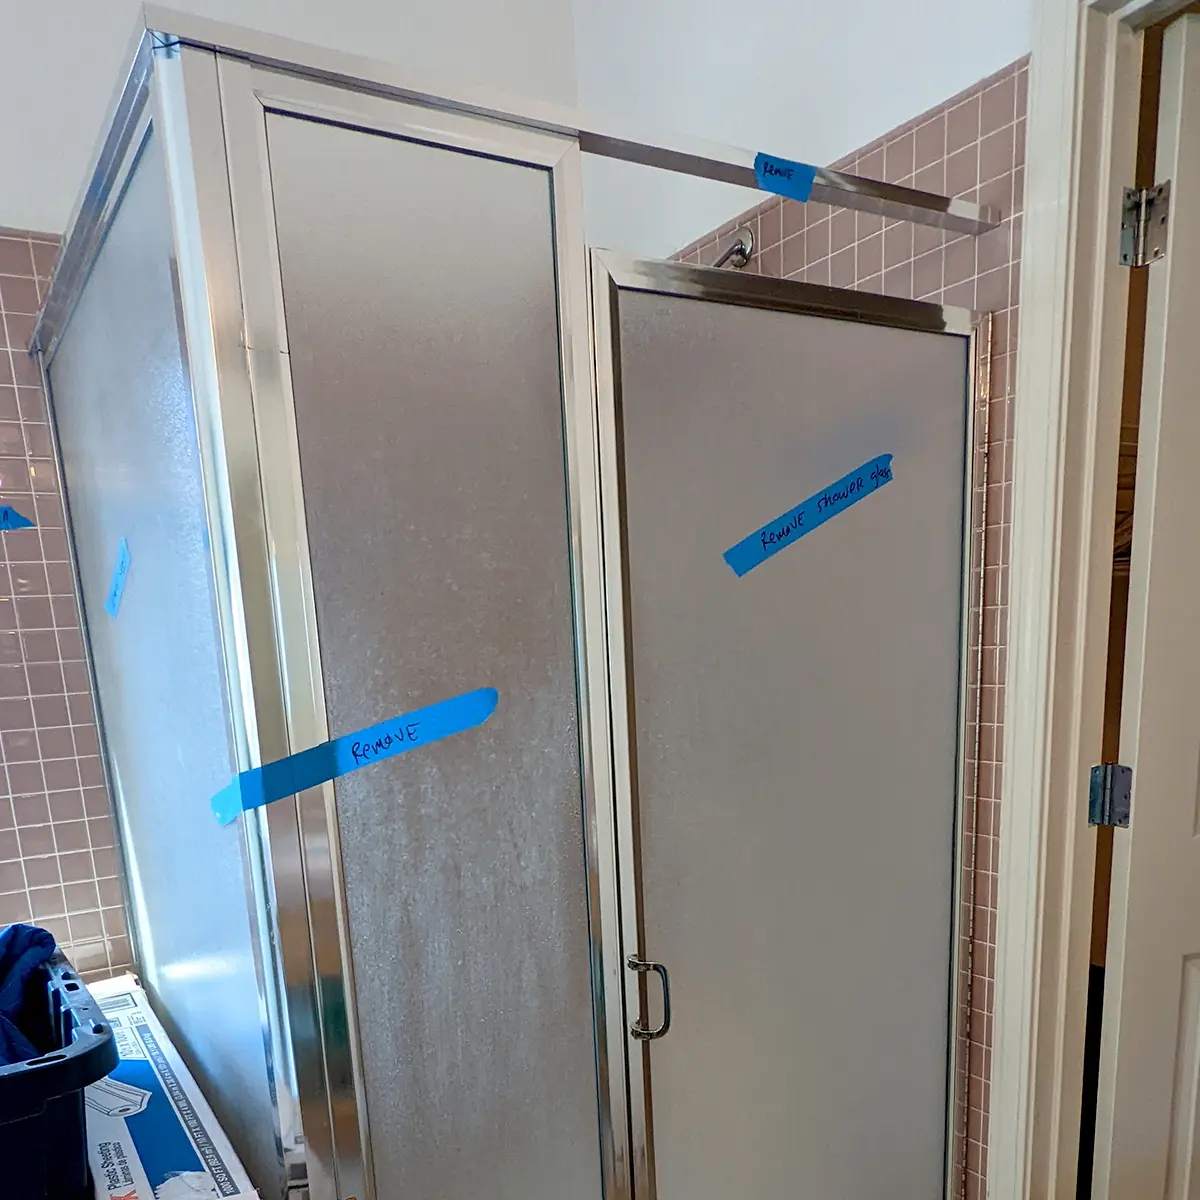 An old glass-shower with blue painter's tape that has different instructions for the builders